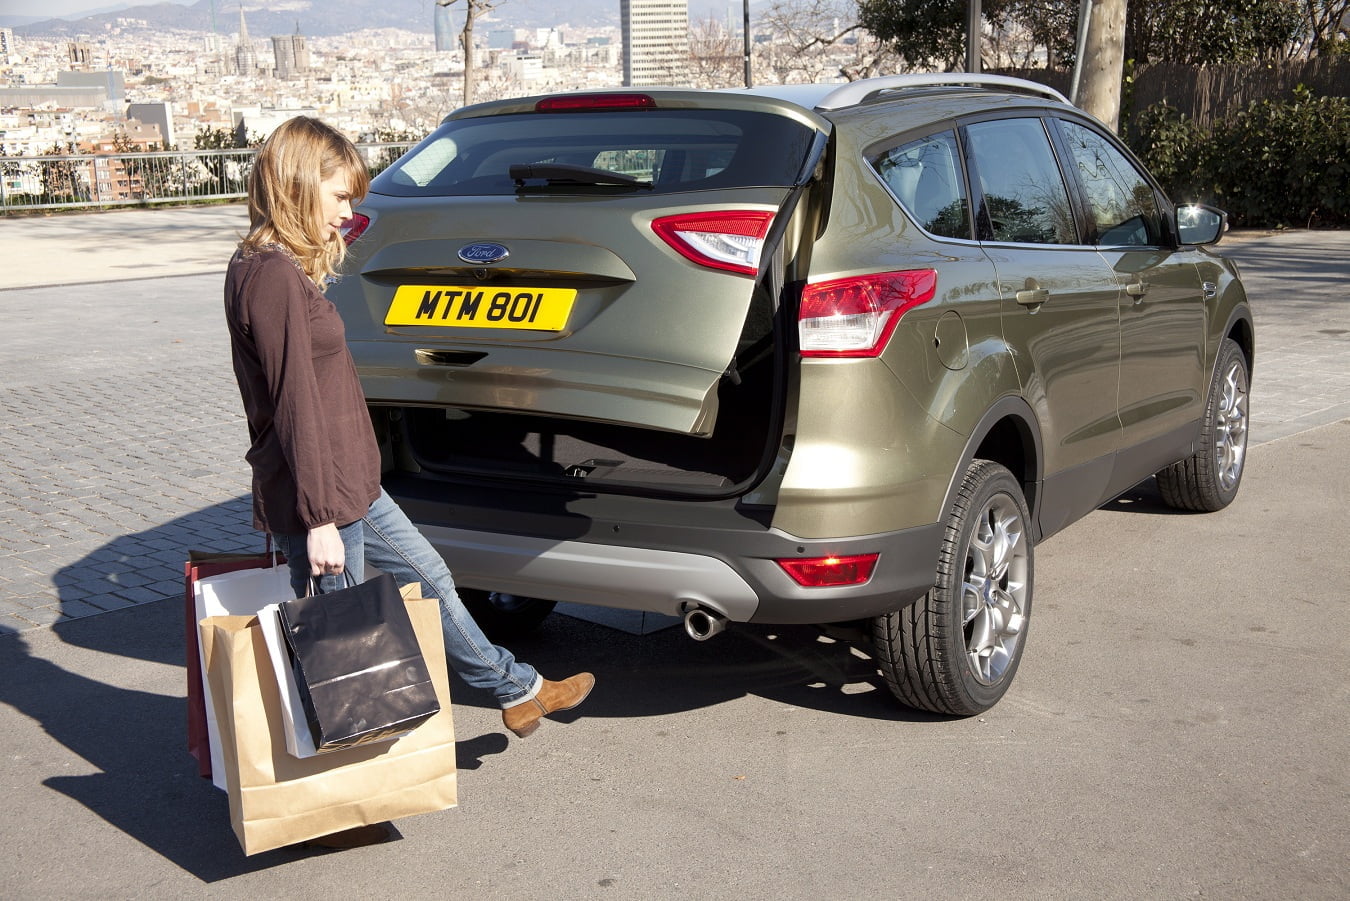 Ford reveals kick-activated automatic tailgate on all-new Kuga, a first-in-segment hands-free system, at the 2012 Geneva Motor Show. Kuga customers will be able to open and close the tailgate simply by waving a foot beneath the rear bumper, an especially useful feature for those carrying groceries or other gear to load into the vehicle. Two sensors in the rear bumper detect a person's shin and kicking motion. The system safeguards against accidental opening by being programmed to open with leg motions - not when an animal runs under the car or when the vehicle hits a bump on the road. (03/05/12)